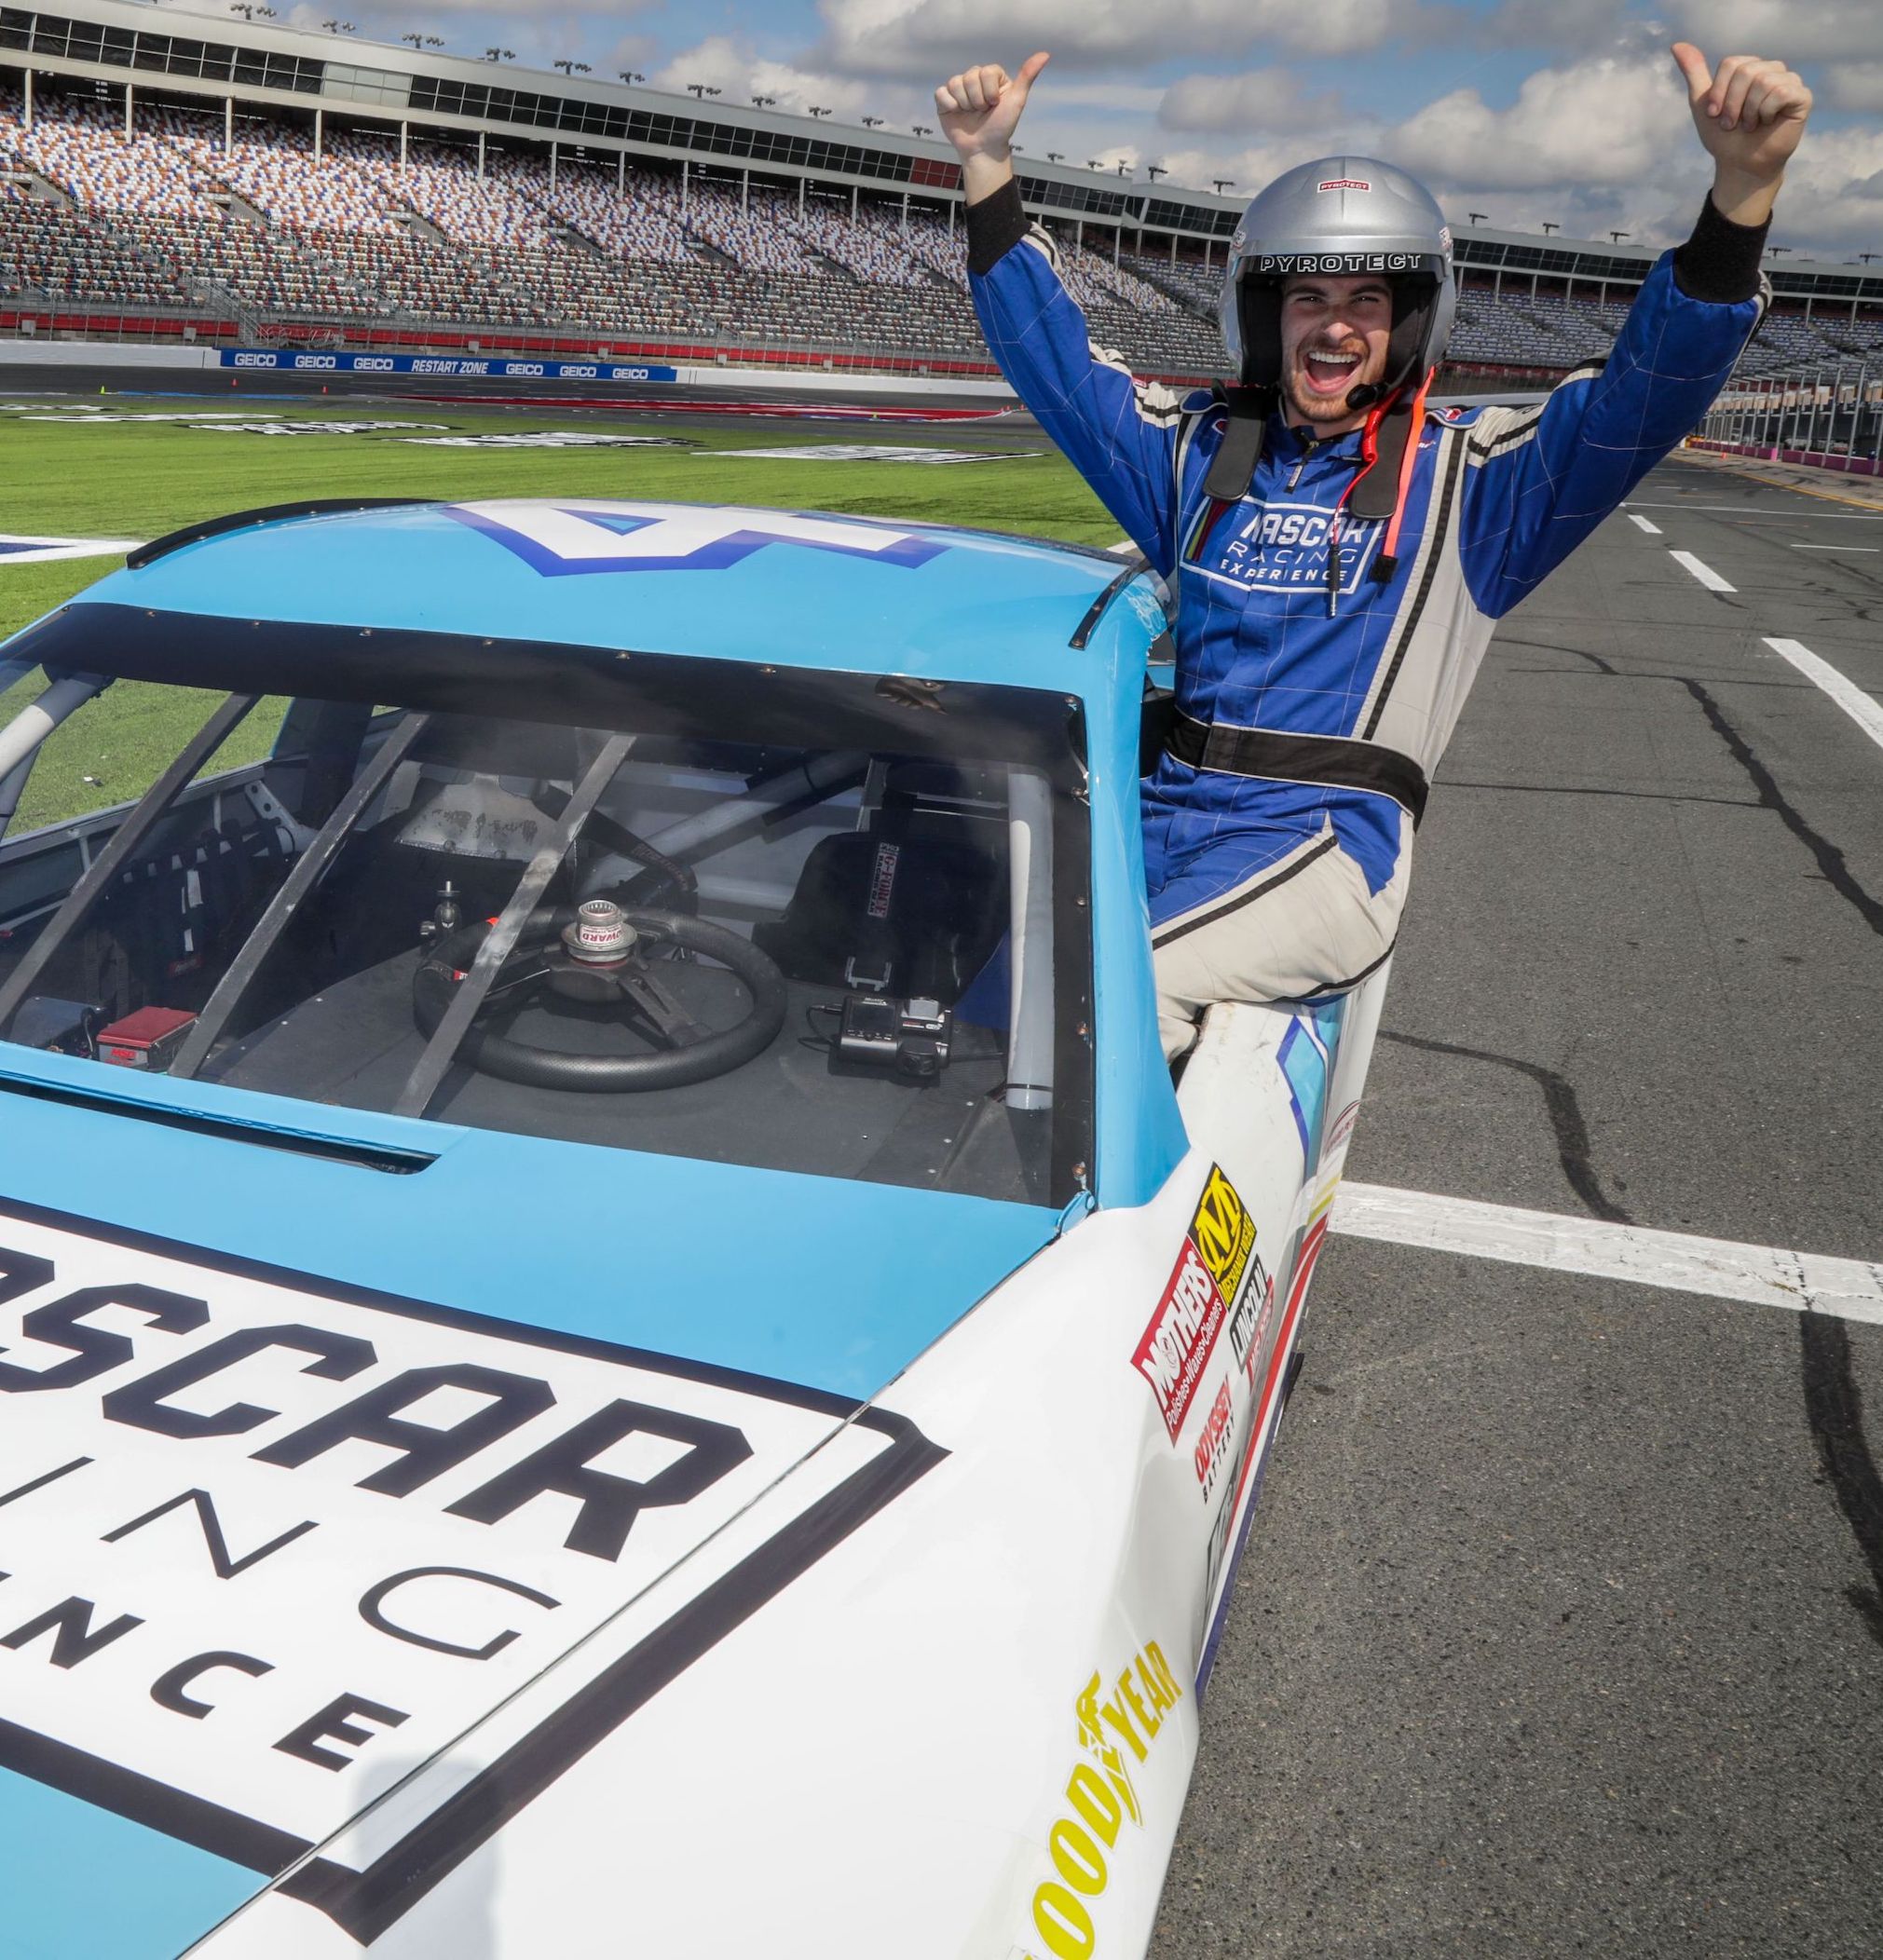 NASCAR Racing Experience Save up to 40%! As real as it gets!